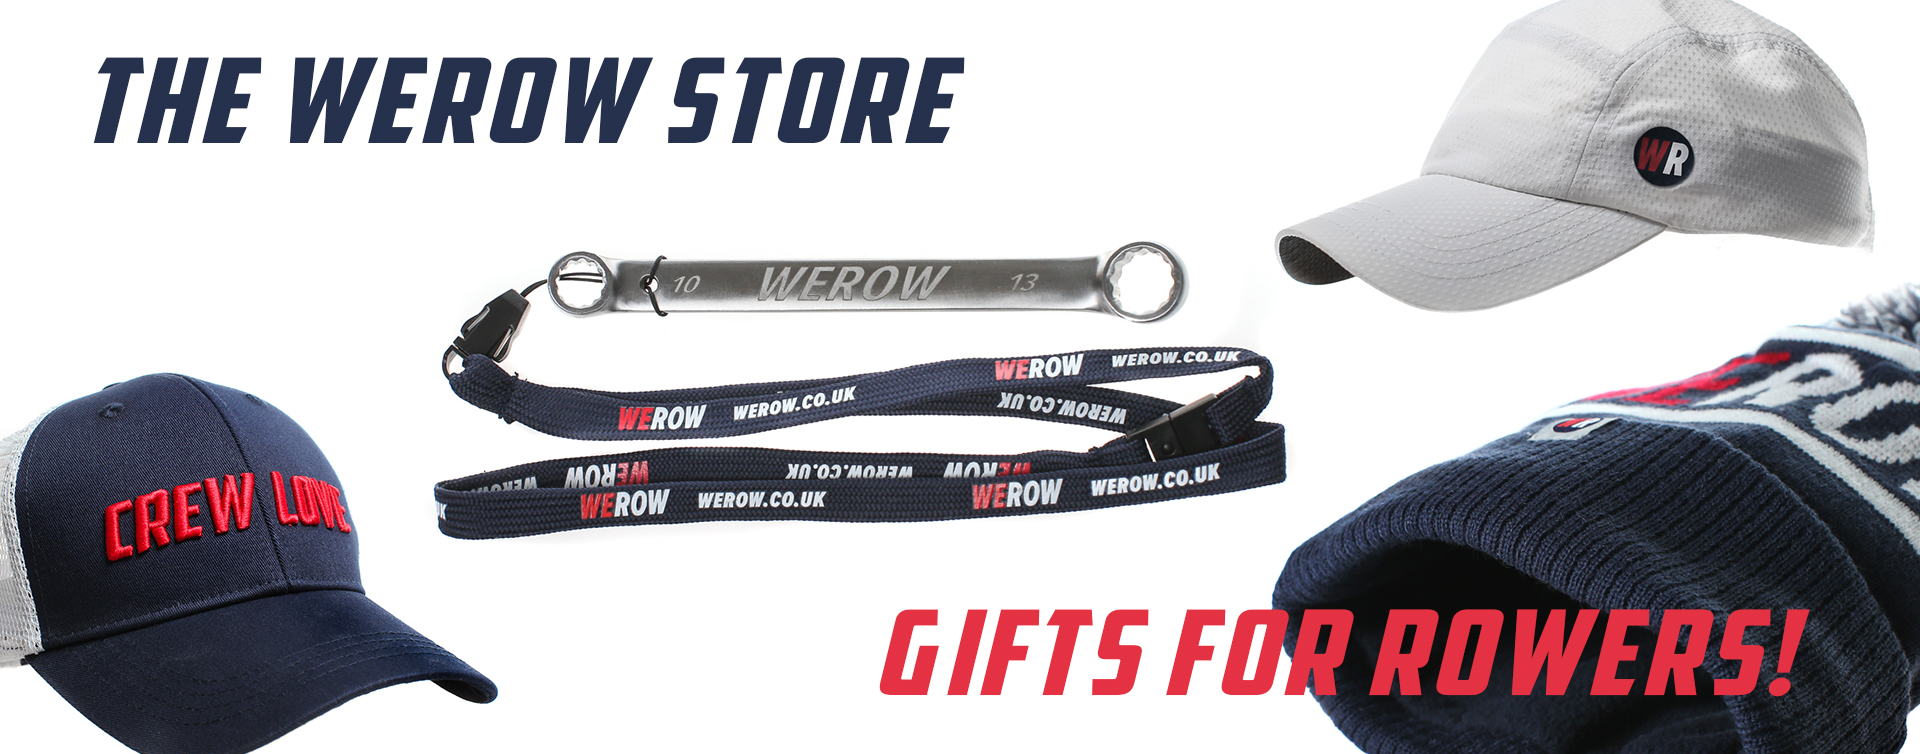 Gifts for rowers from the WEROW store - Alice Baatz - British Indoor Rowing Champion 2018